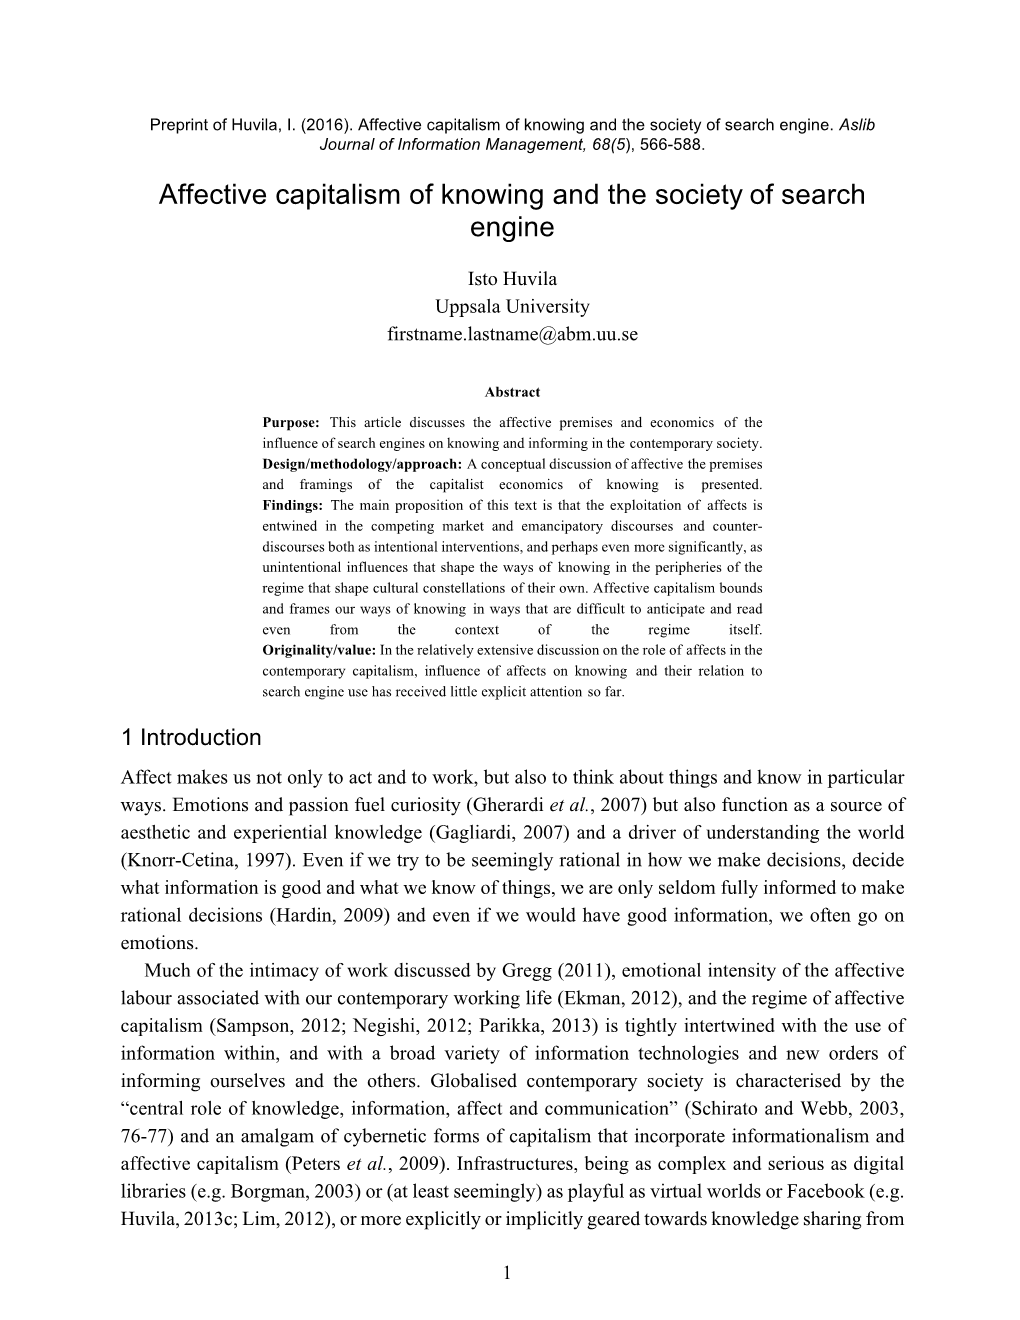 Affective Capitalism of Knowing and the Society of Search Engine